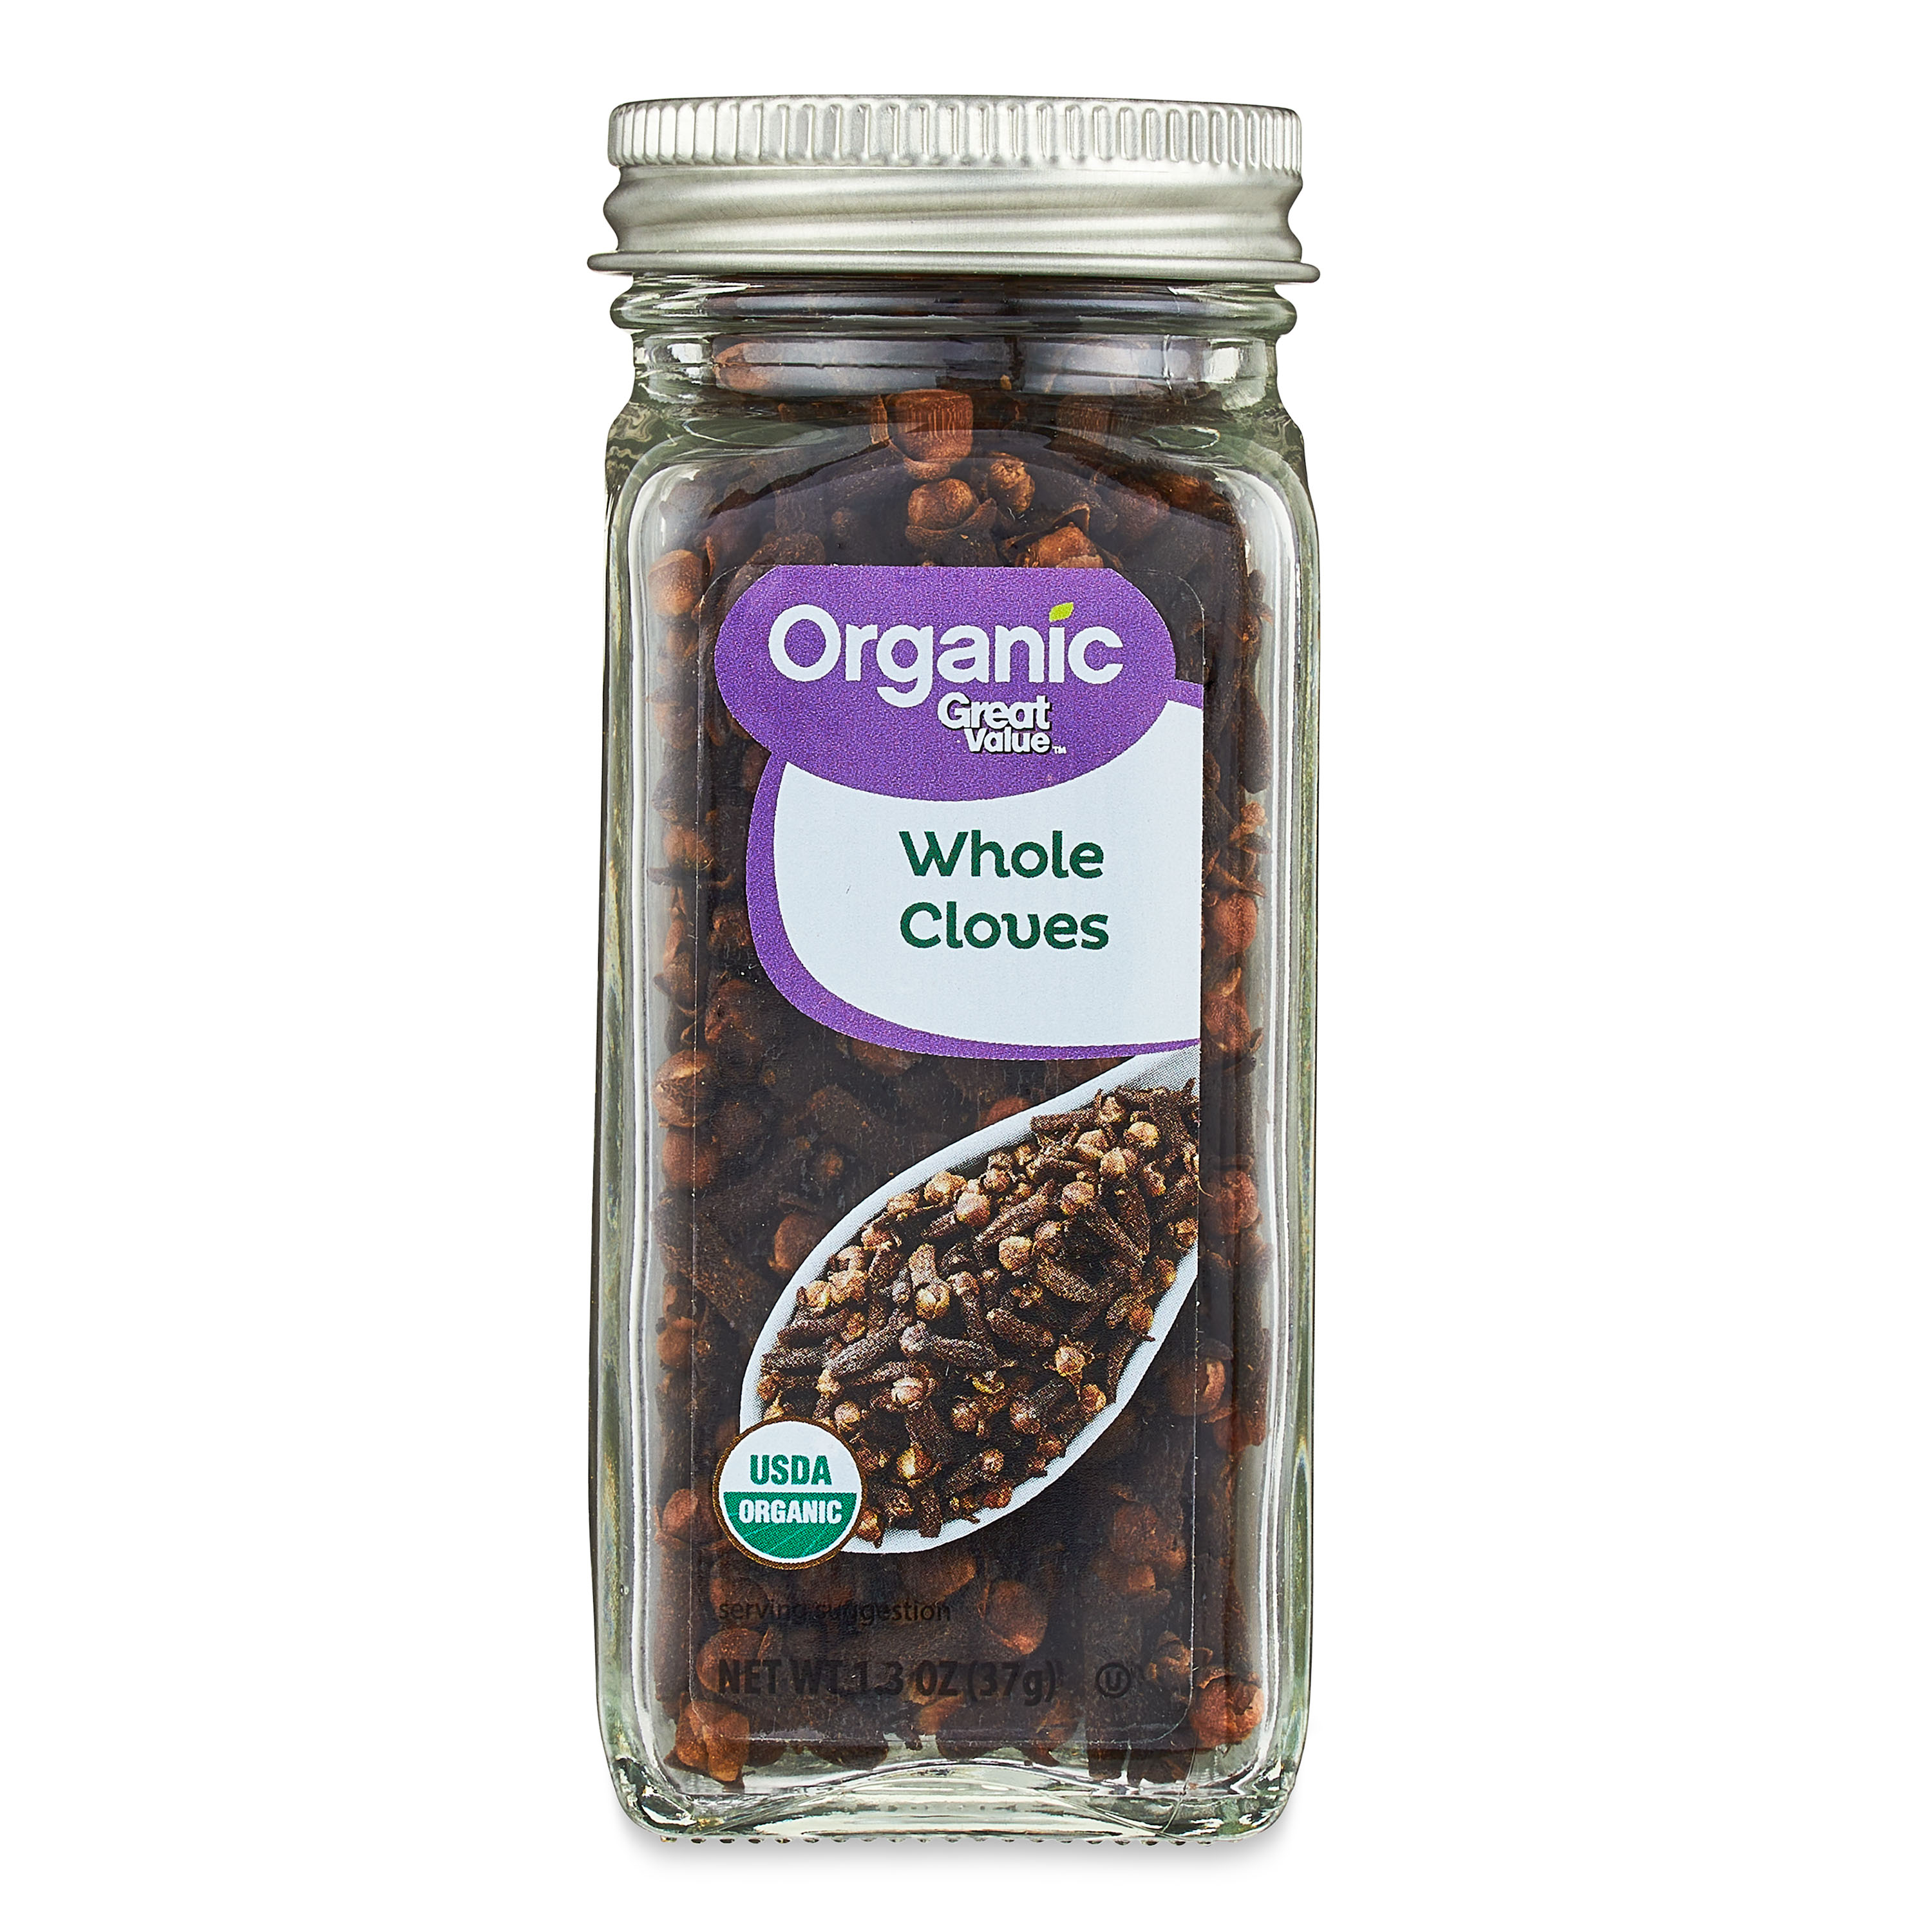 Great Value Organic Whole Cloves, 1.3 oz - image 1 of 10